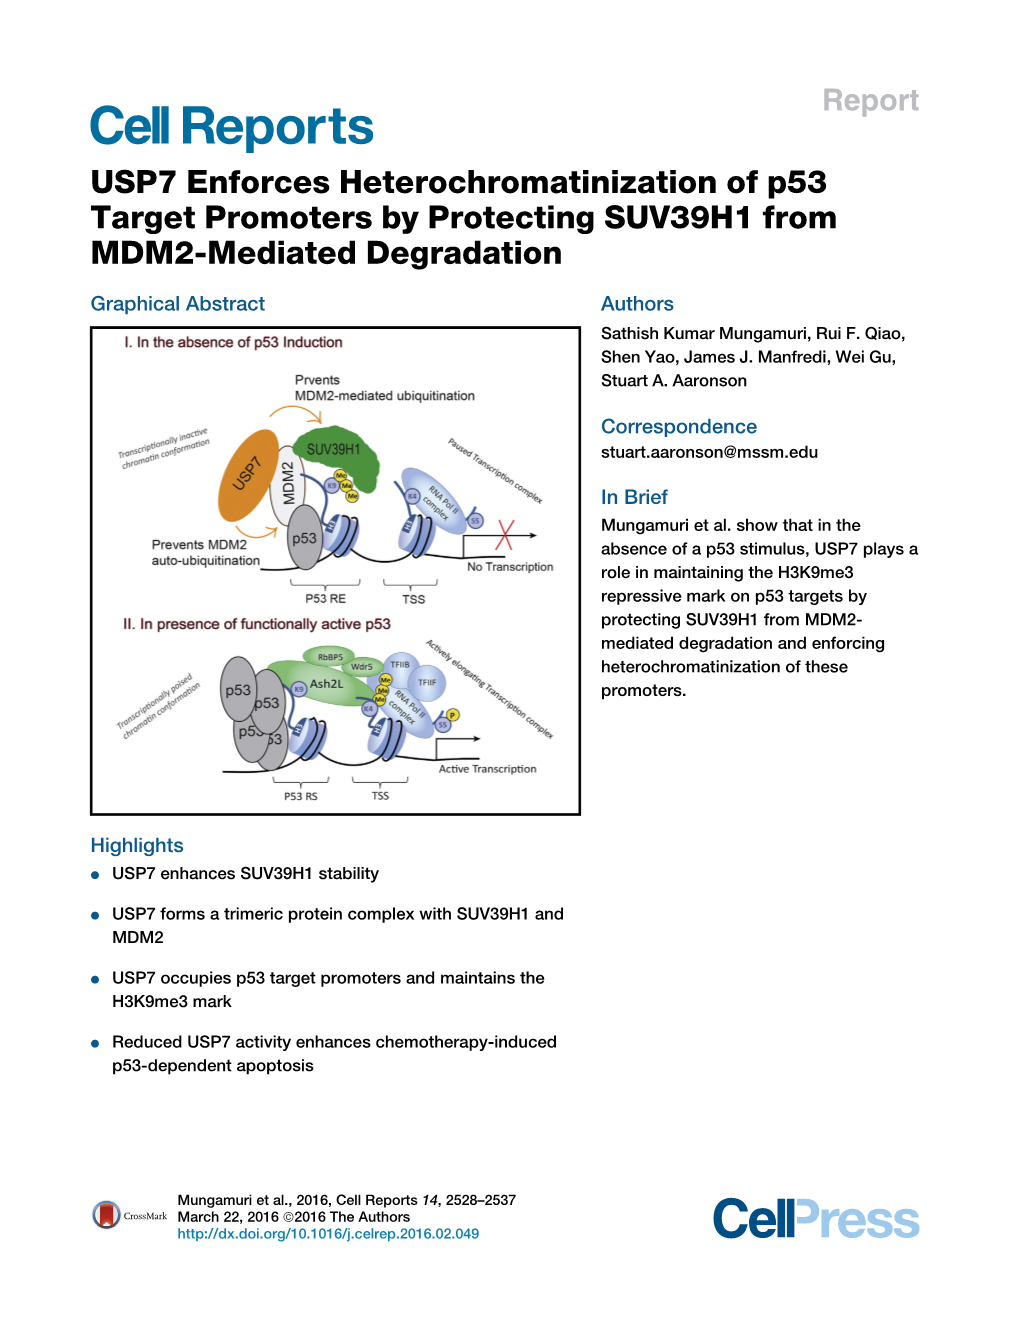 USP7 Enforces Heterochromatinization of P53 Target Promoters by Protecting SUV39H1 from MDM2-Mediated Degradation